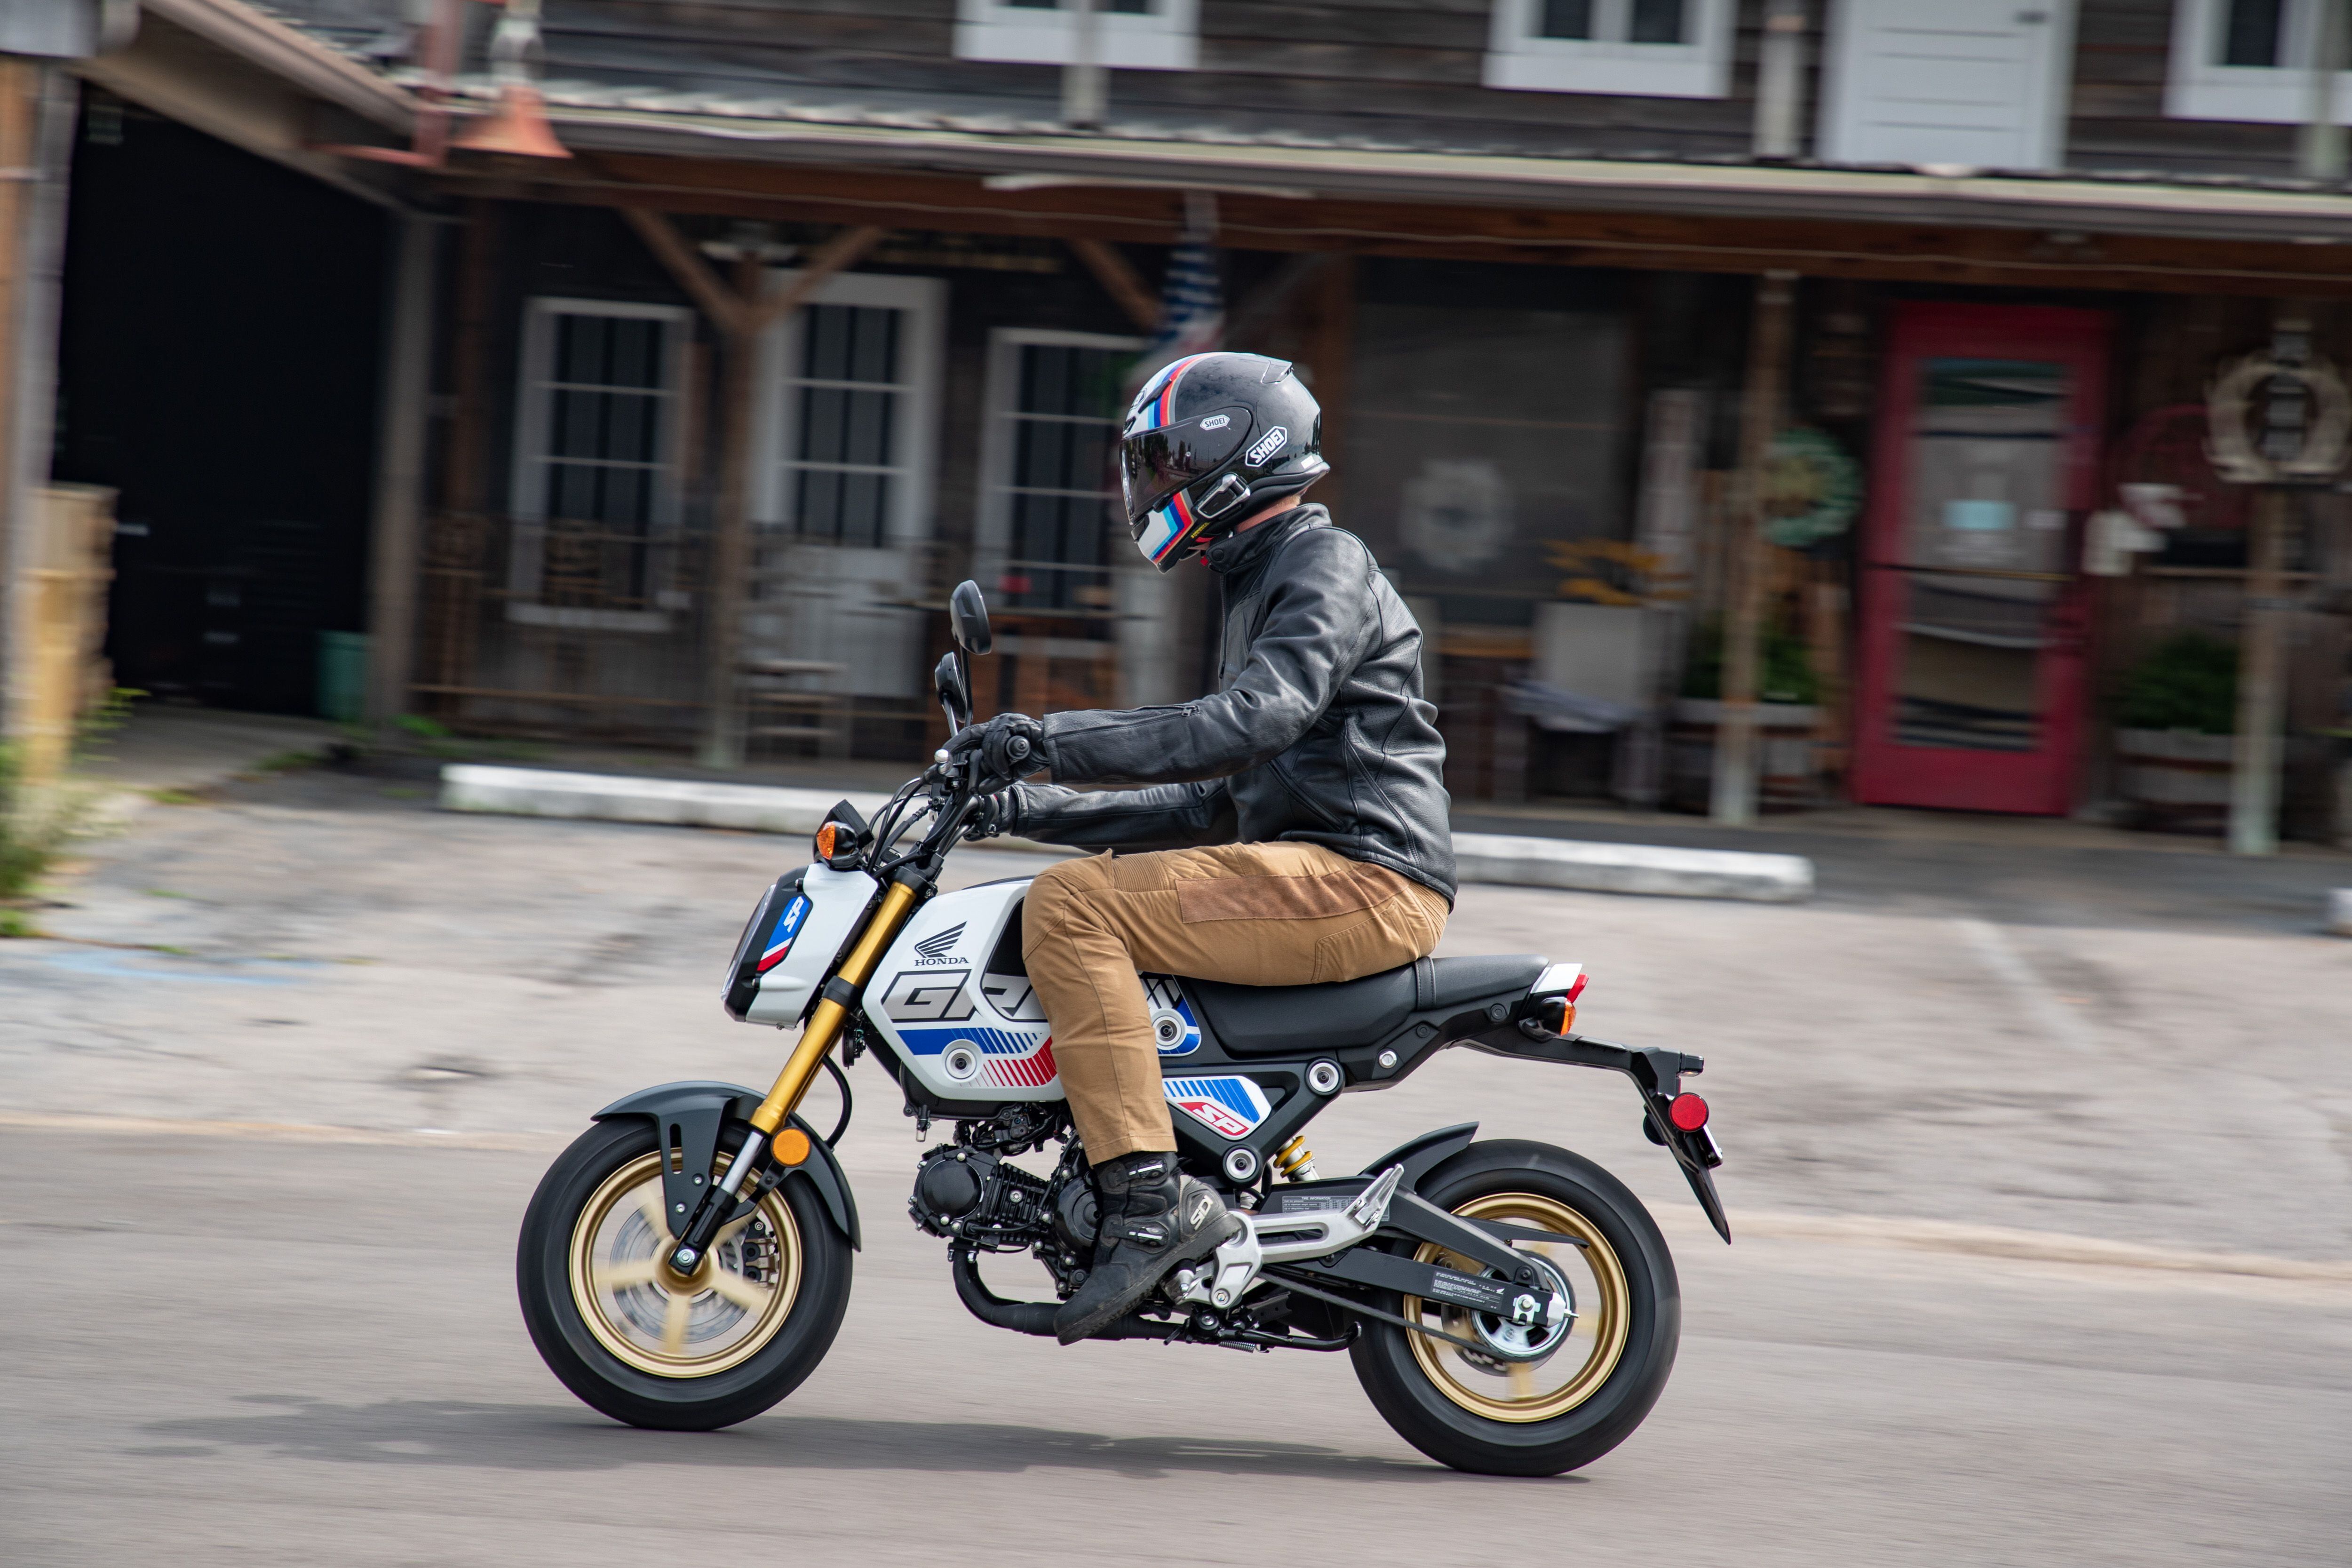 Honda’s Grom is the leader of the pack when it comes to minimotos. The latest version is centered on an easily customizable design and refined, 124cc engine.